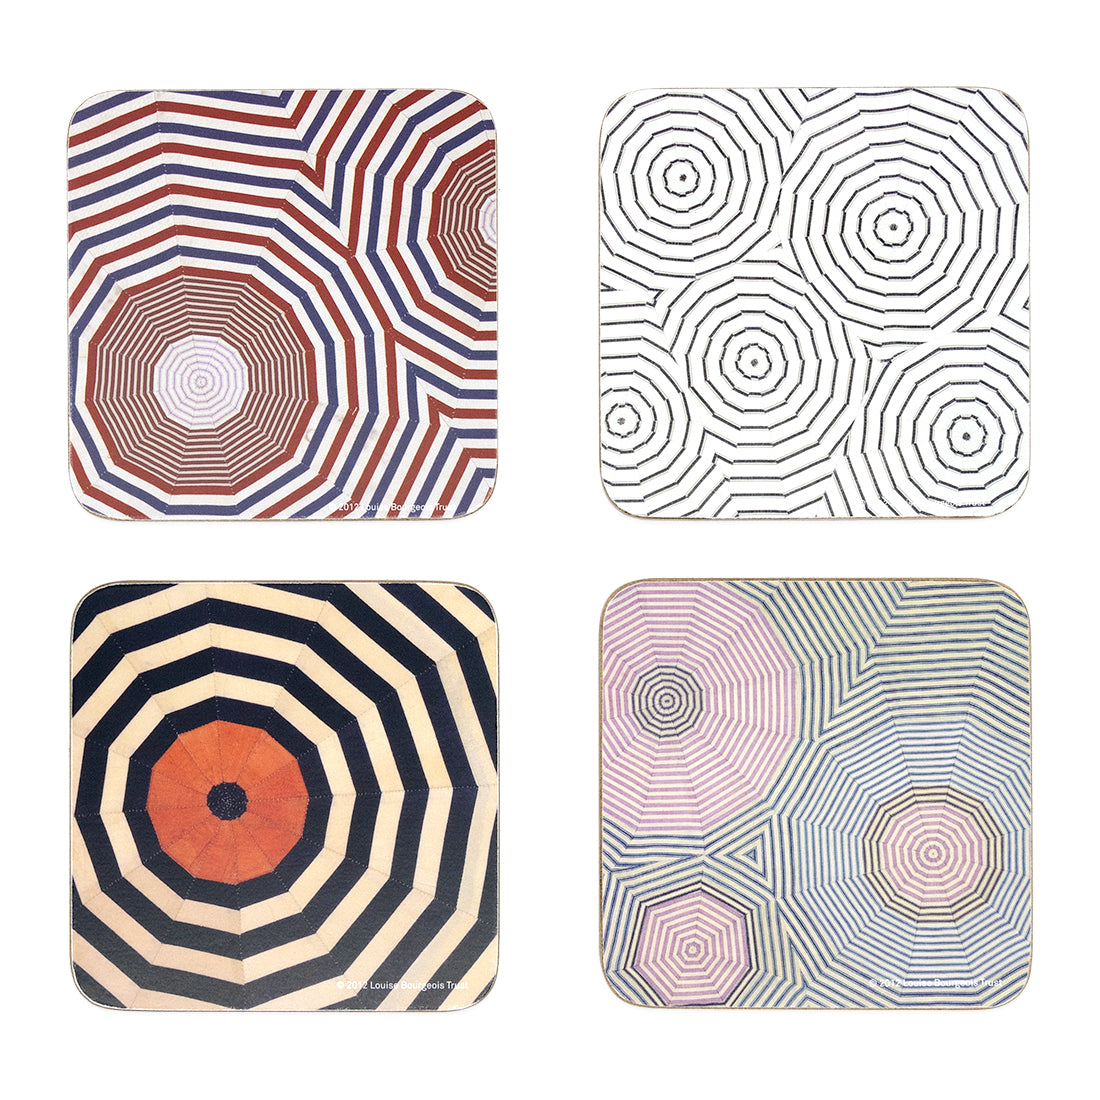 Louise Bourgeois Coaster Set - Concentric Stripes